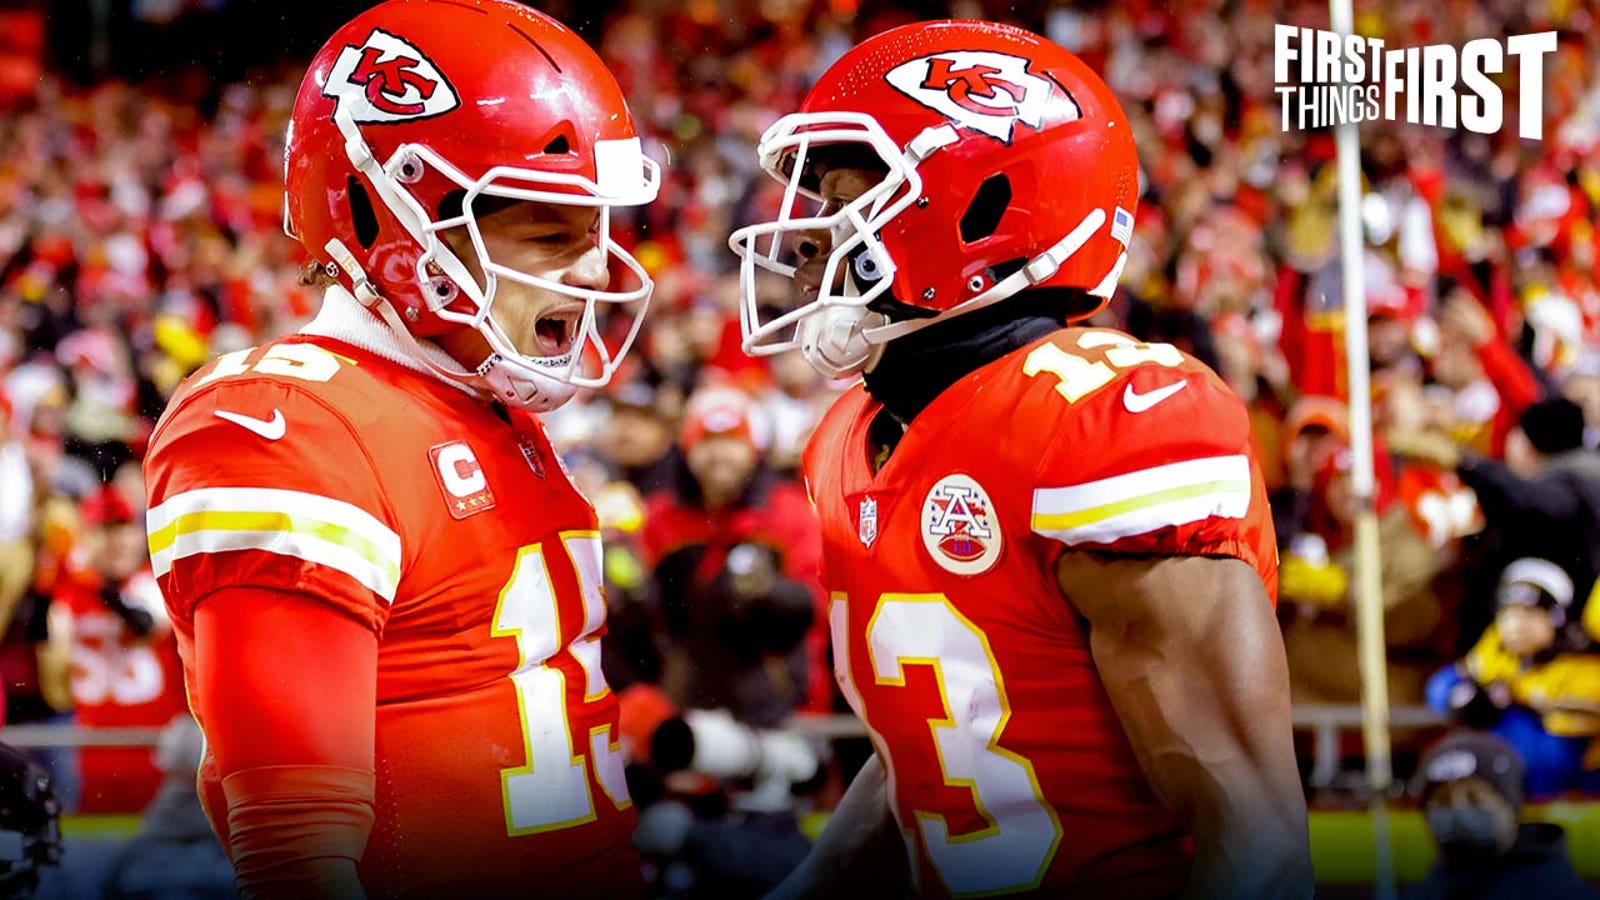 Nick Wright on Chiefs' win over Steelers: 'I'd say that was better than a bye' I FIRST THINGS FIRST